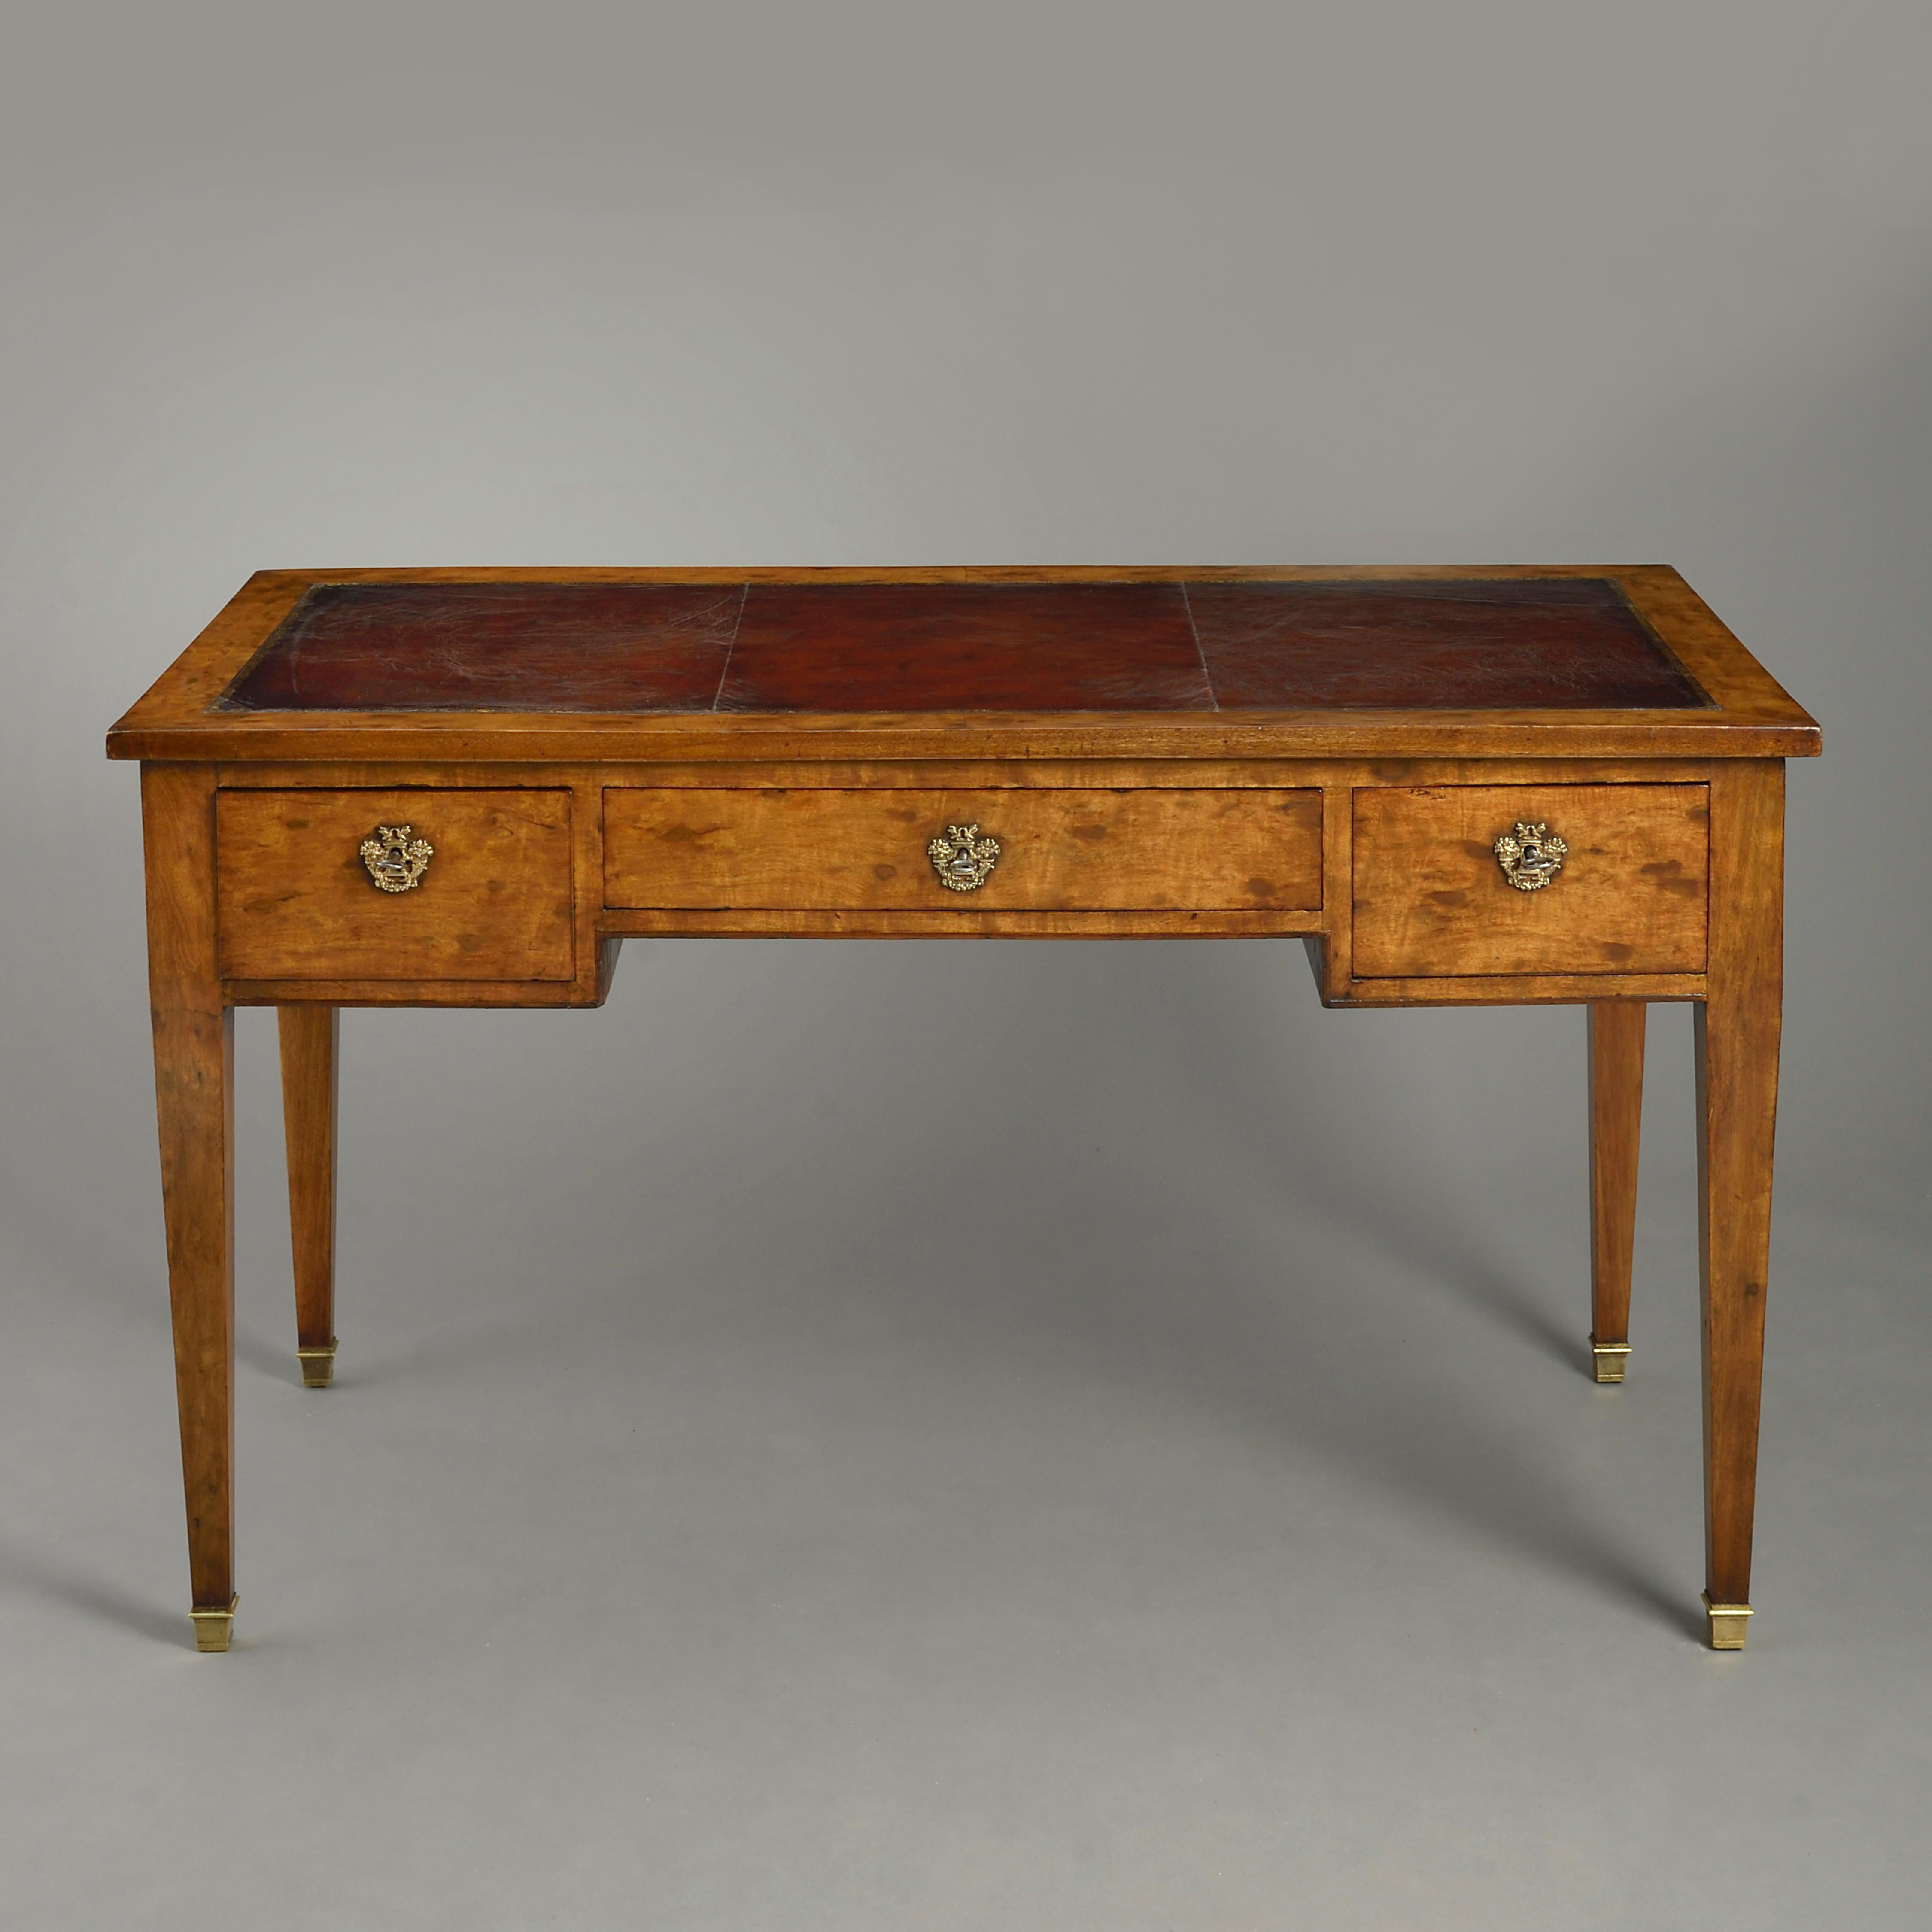 An early 19th century plum pudding mahogany bureau plat, having a leather top above a central long drawer and two flanking drawers, all raised on square tapering legs with brass sabots.

   